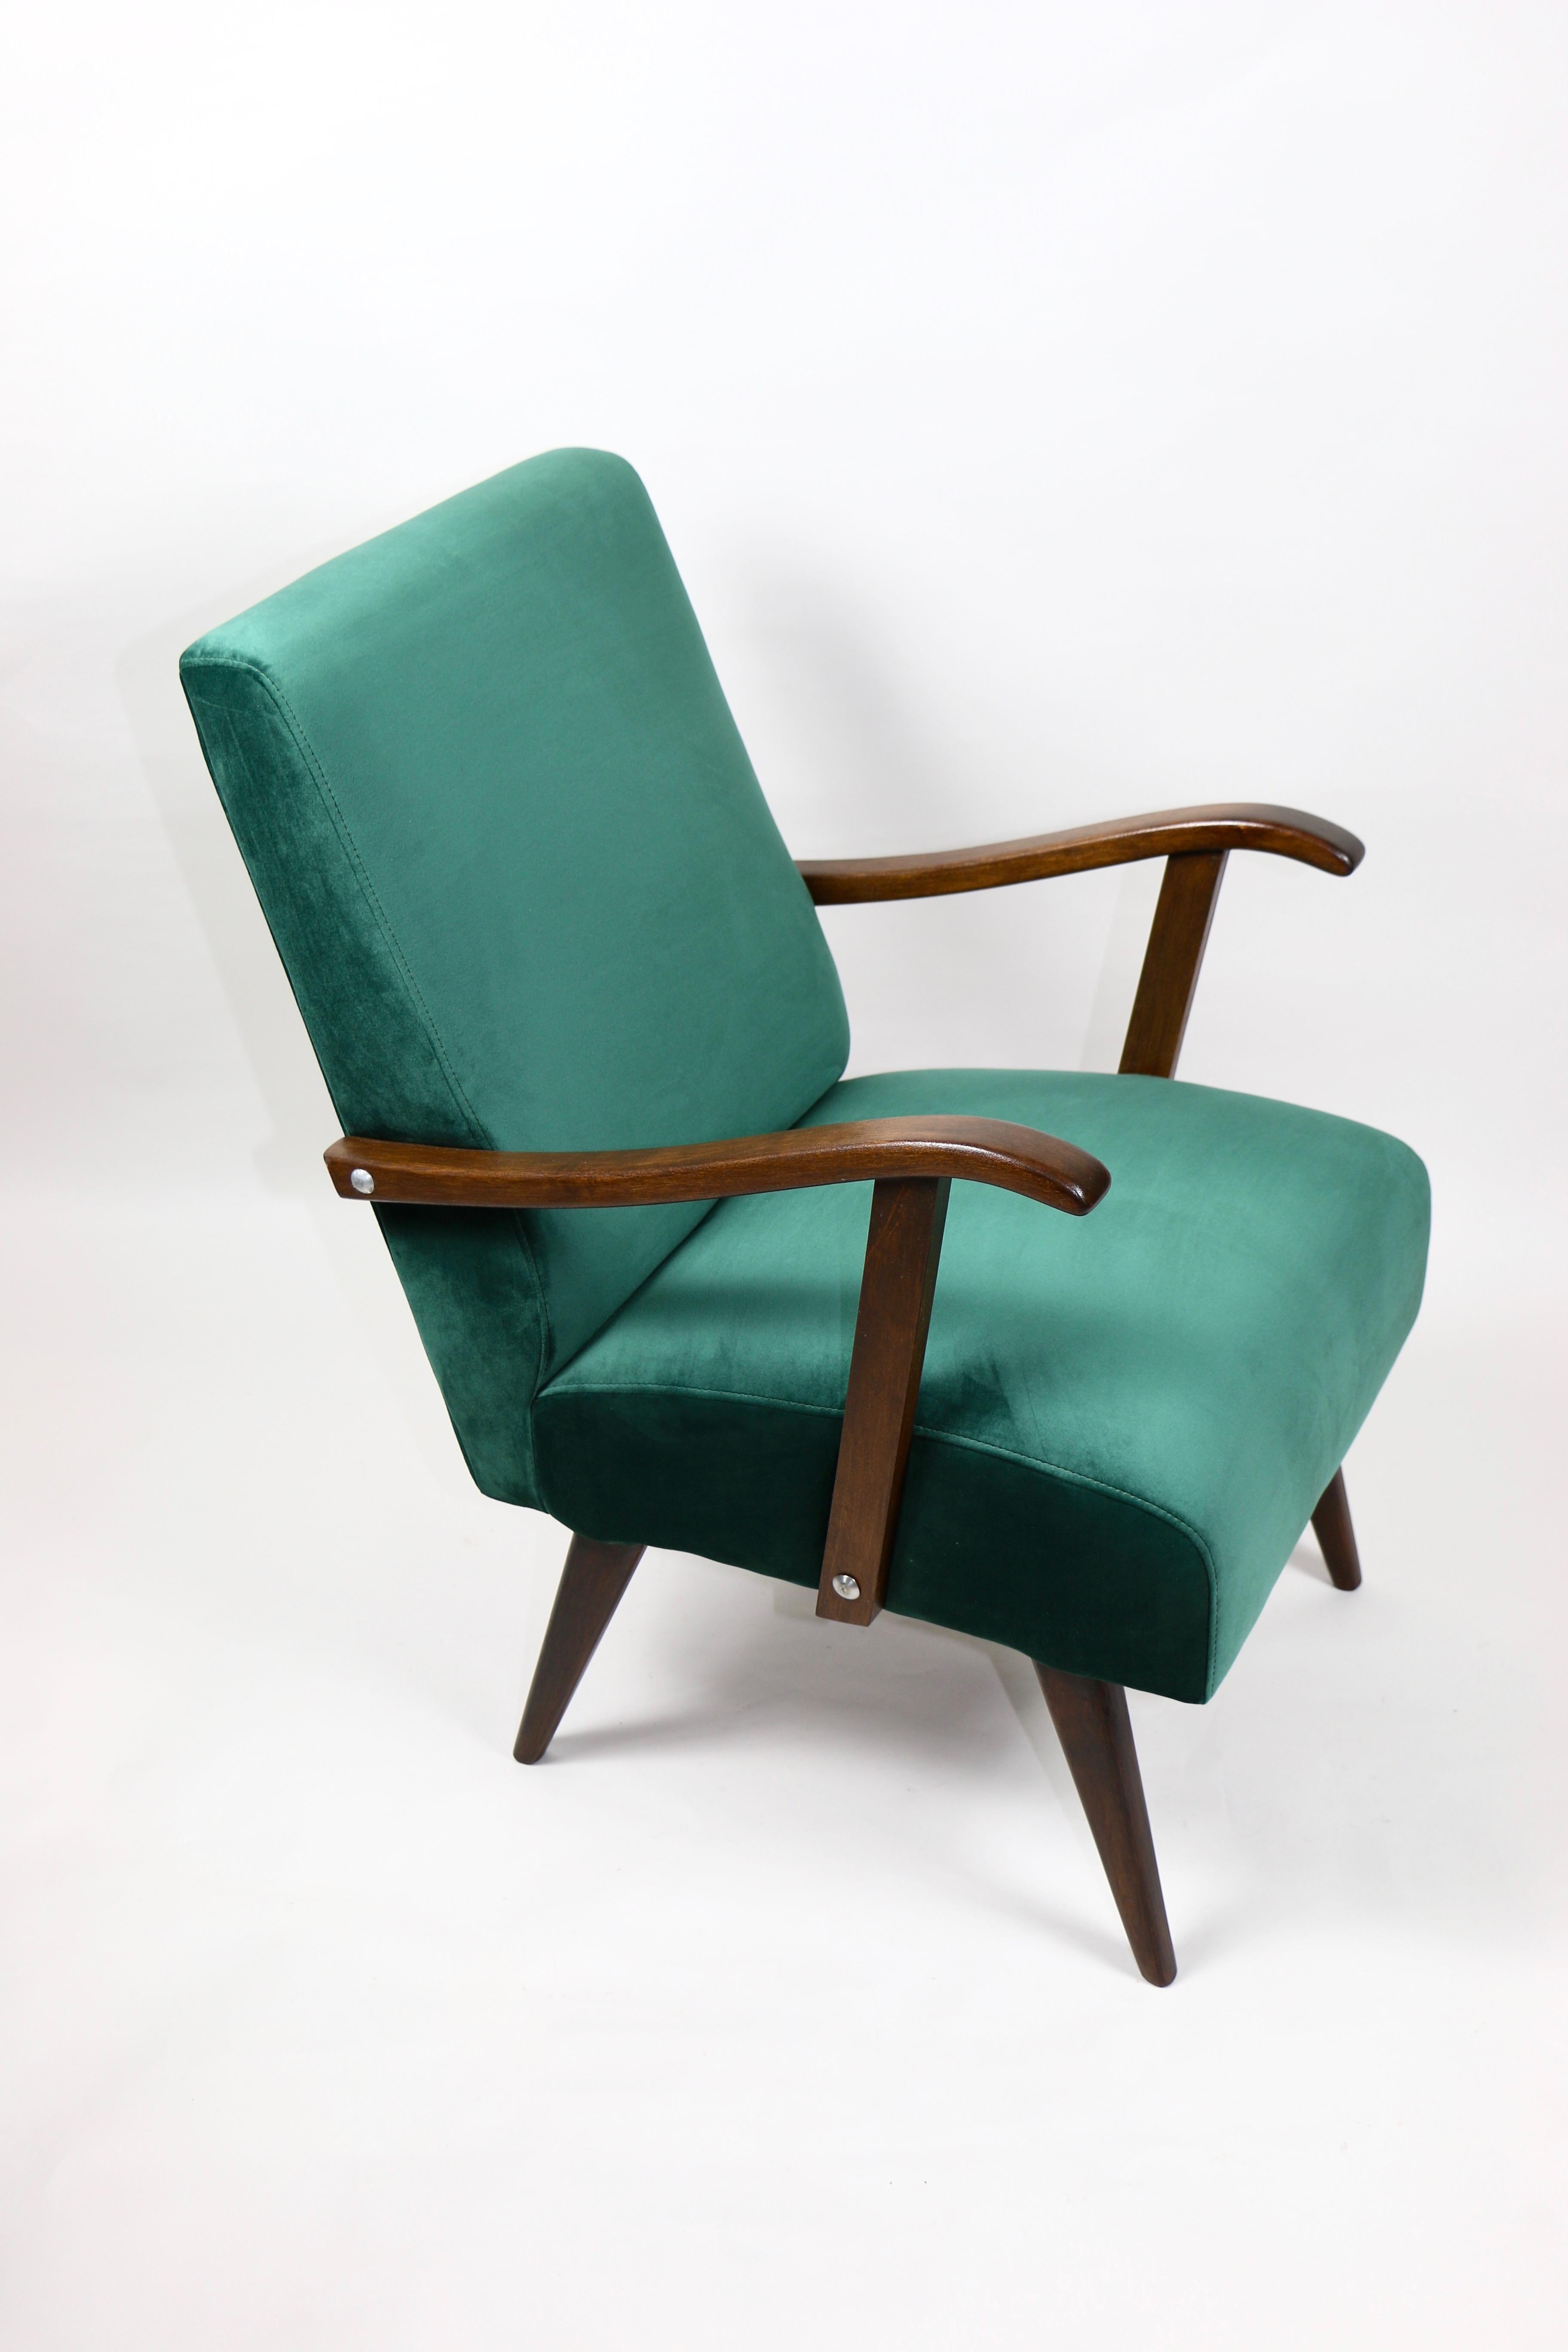 Vintage club armchair design in green made velvet from 1970s, new upholstery covered with velvet fabric in fashionable green color, finished with wooden chair cushion. Wooden elements in dark oak color. Perfect condition. This model is one of the